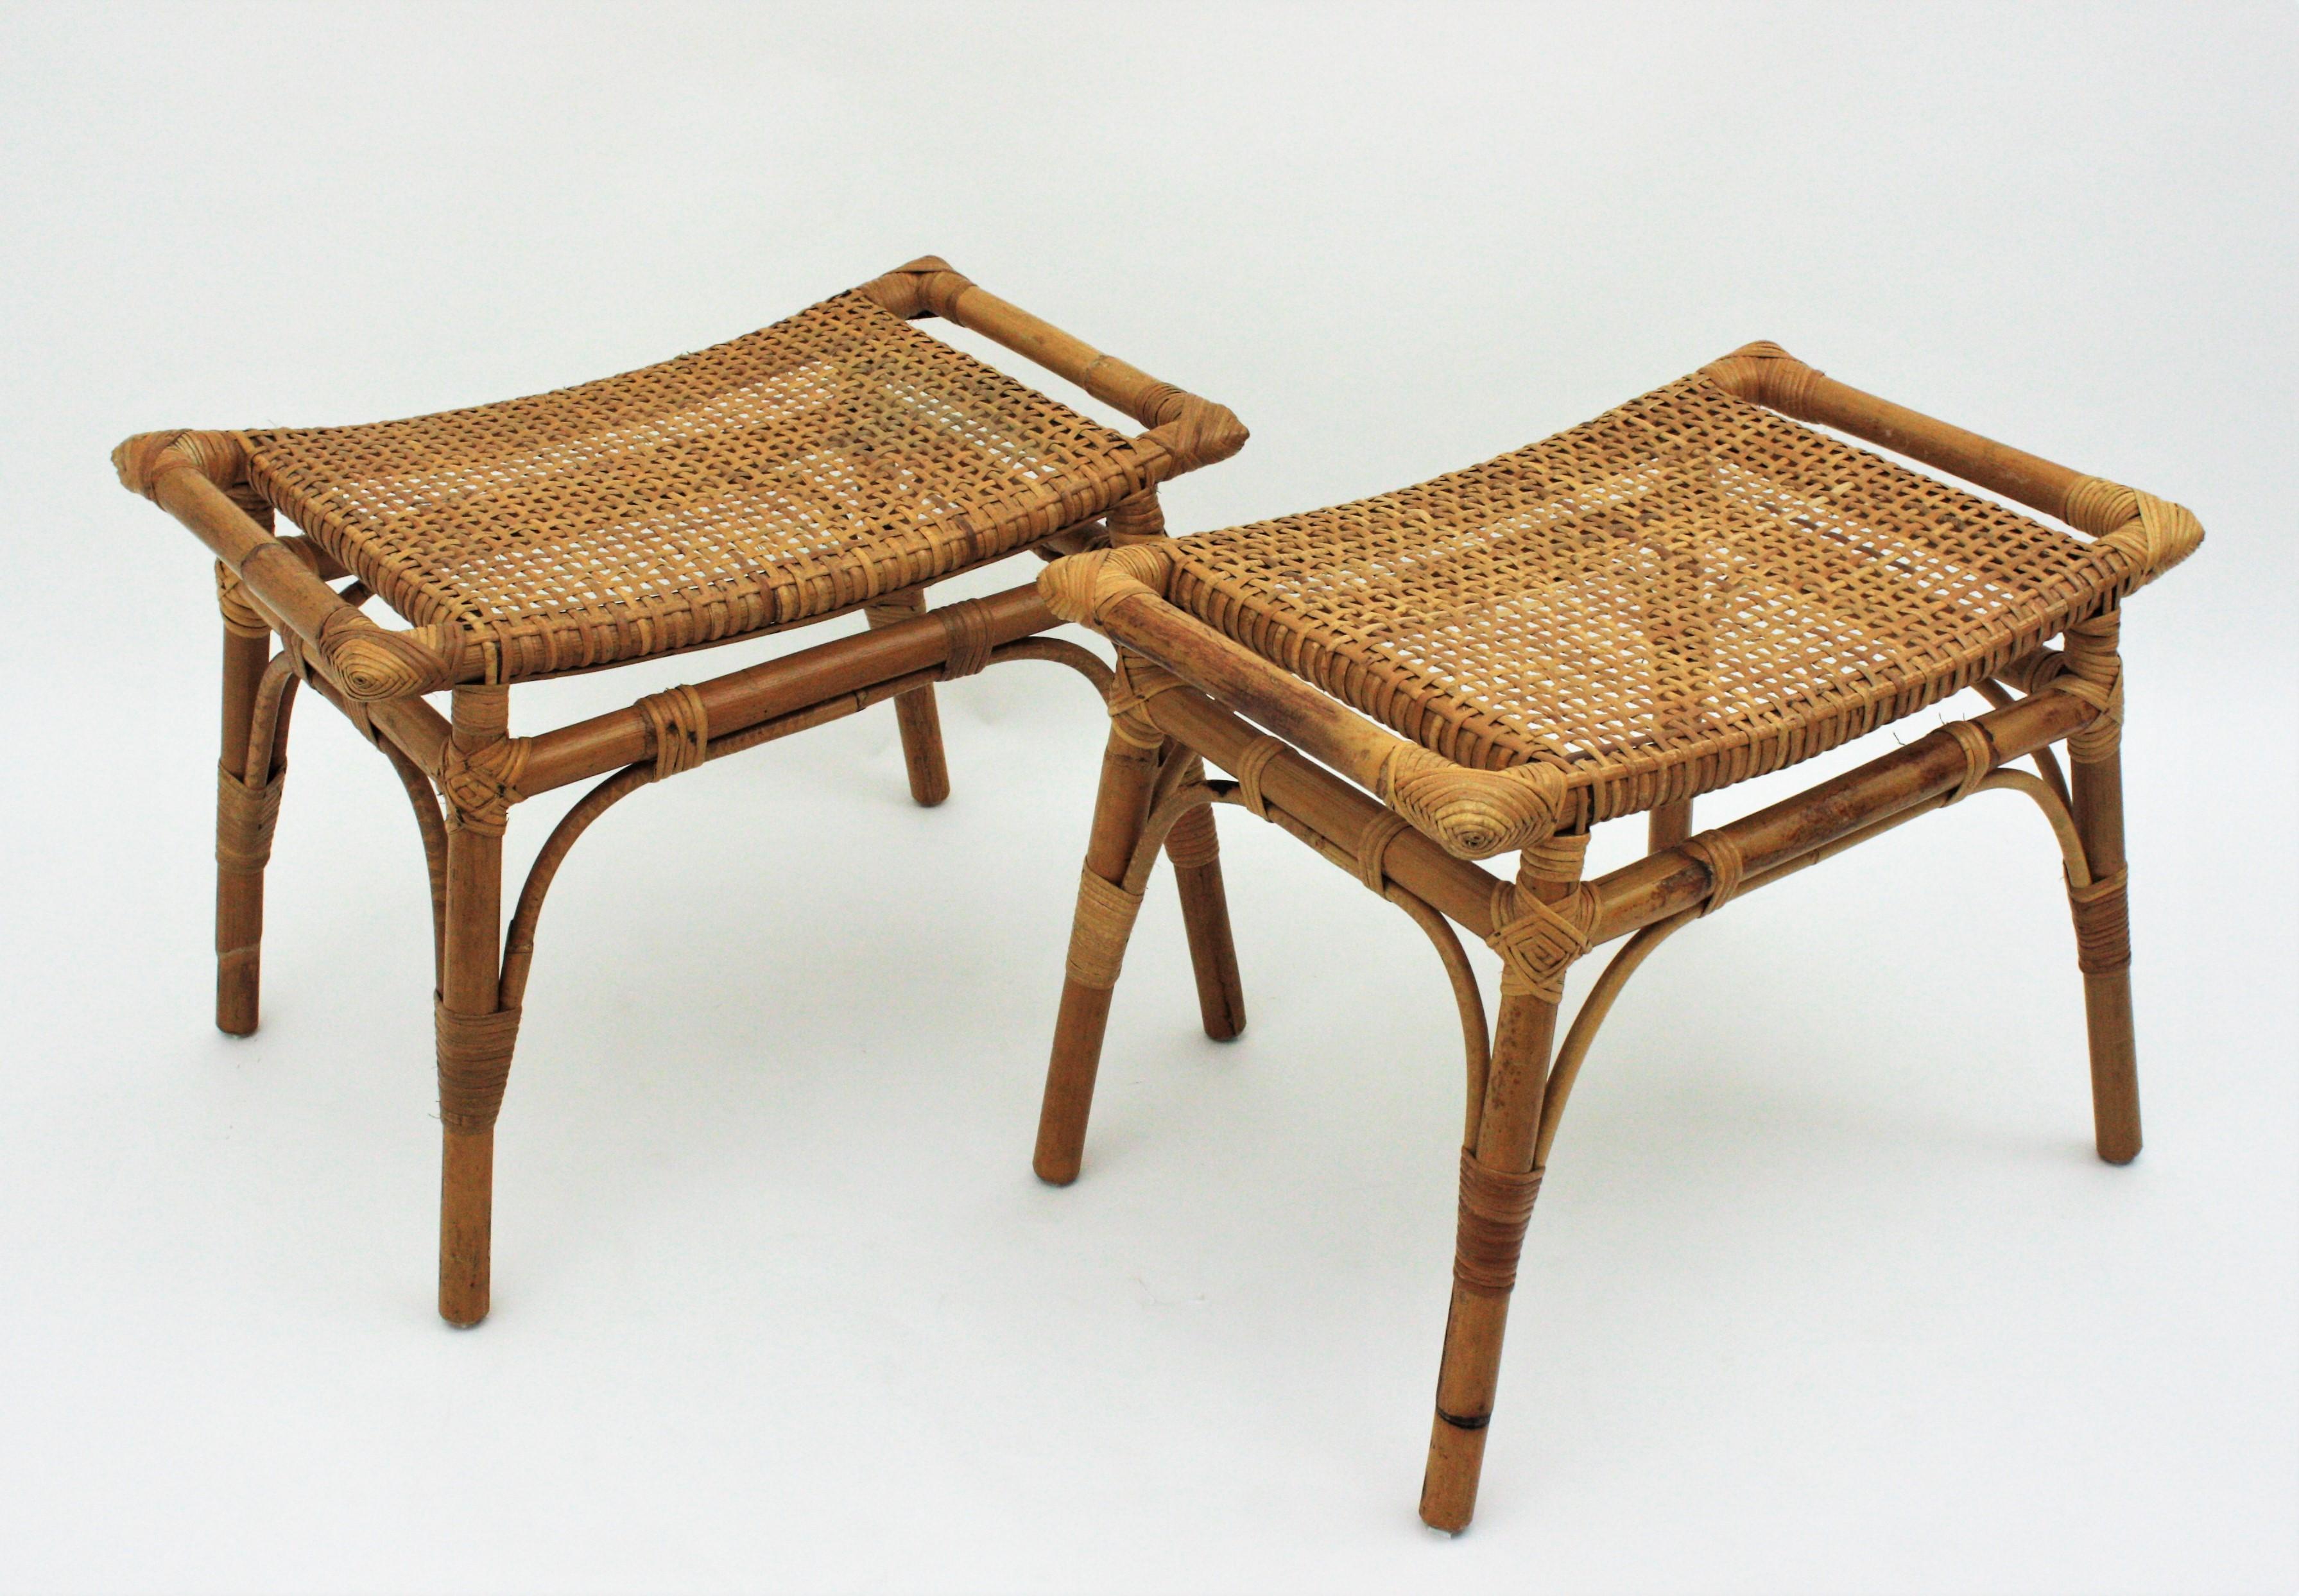 Mid-Century Modern Pair of Bamboo Stools, Benches or Ottoman with Woven Wicker Cane Seats